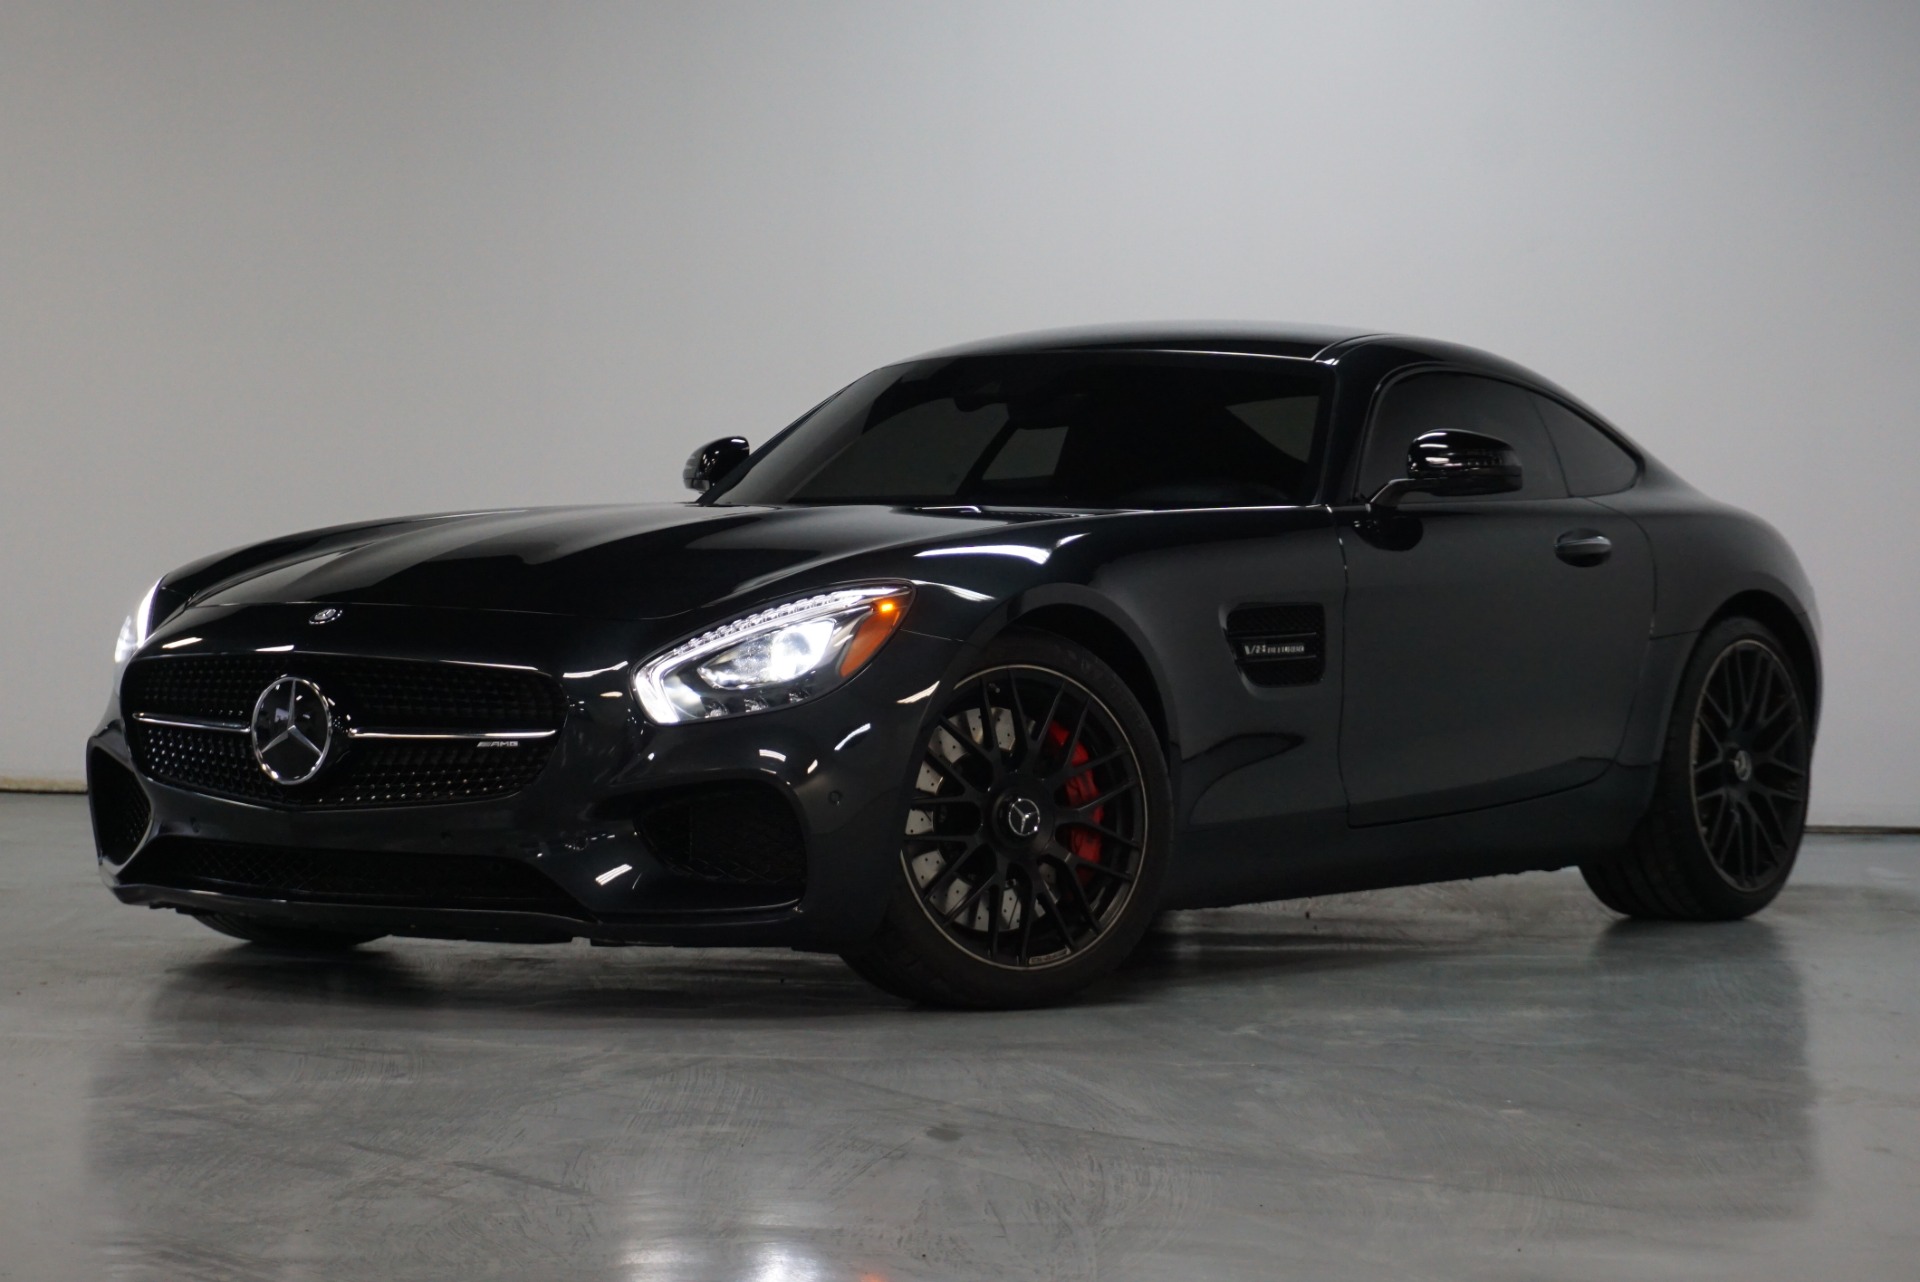 Used 2016 Magnetite Black Metallic Mercedes Benz Amg Gt S Dynamic S For Sale Sold Prime Motorz Stock 2702